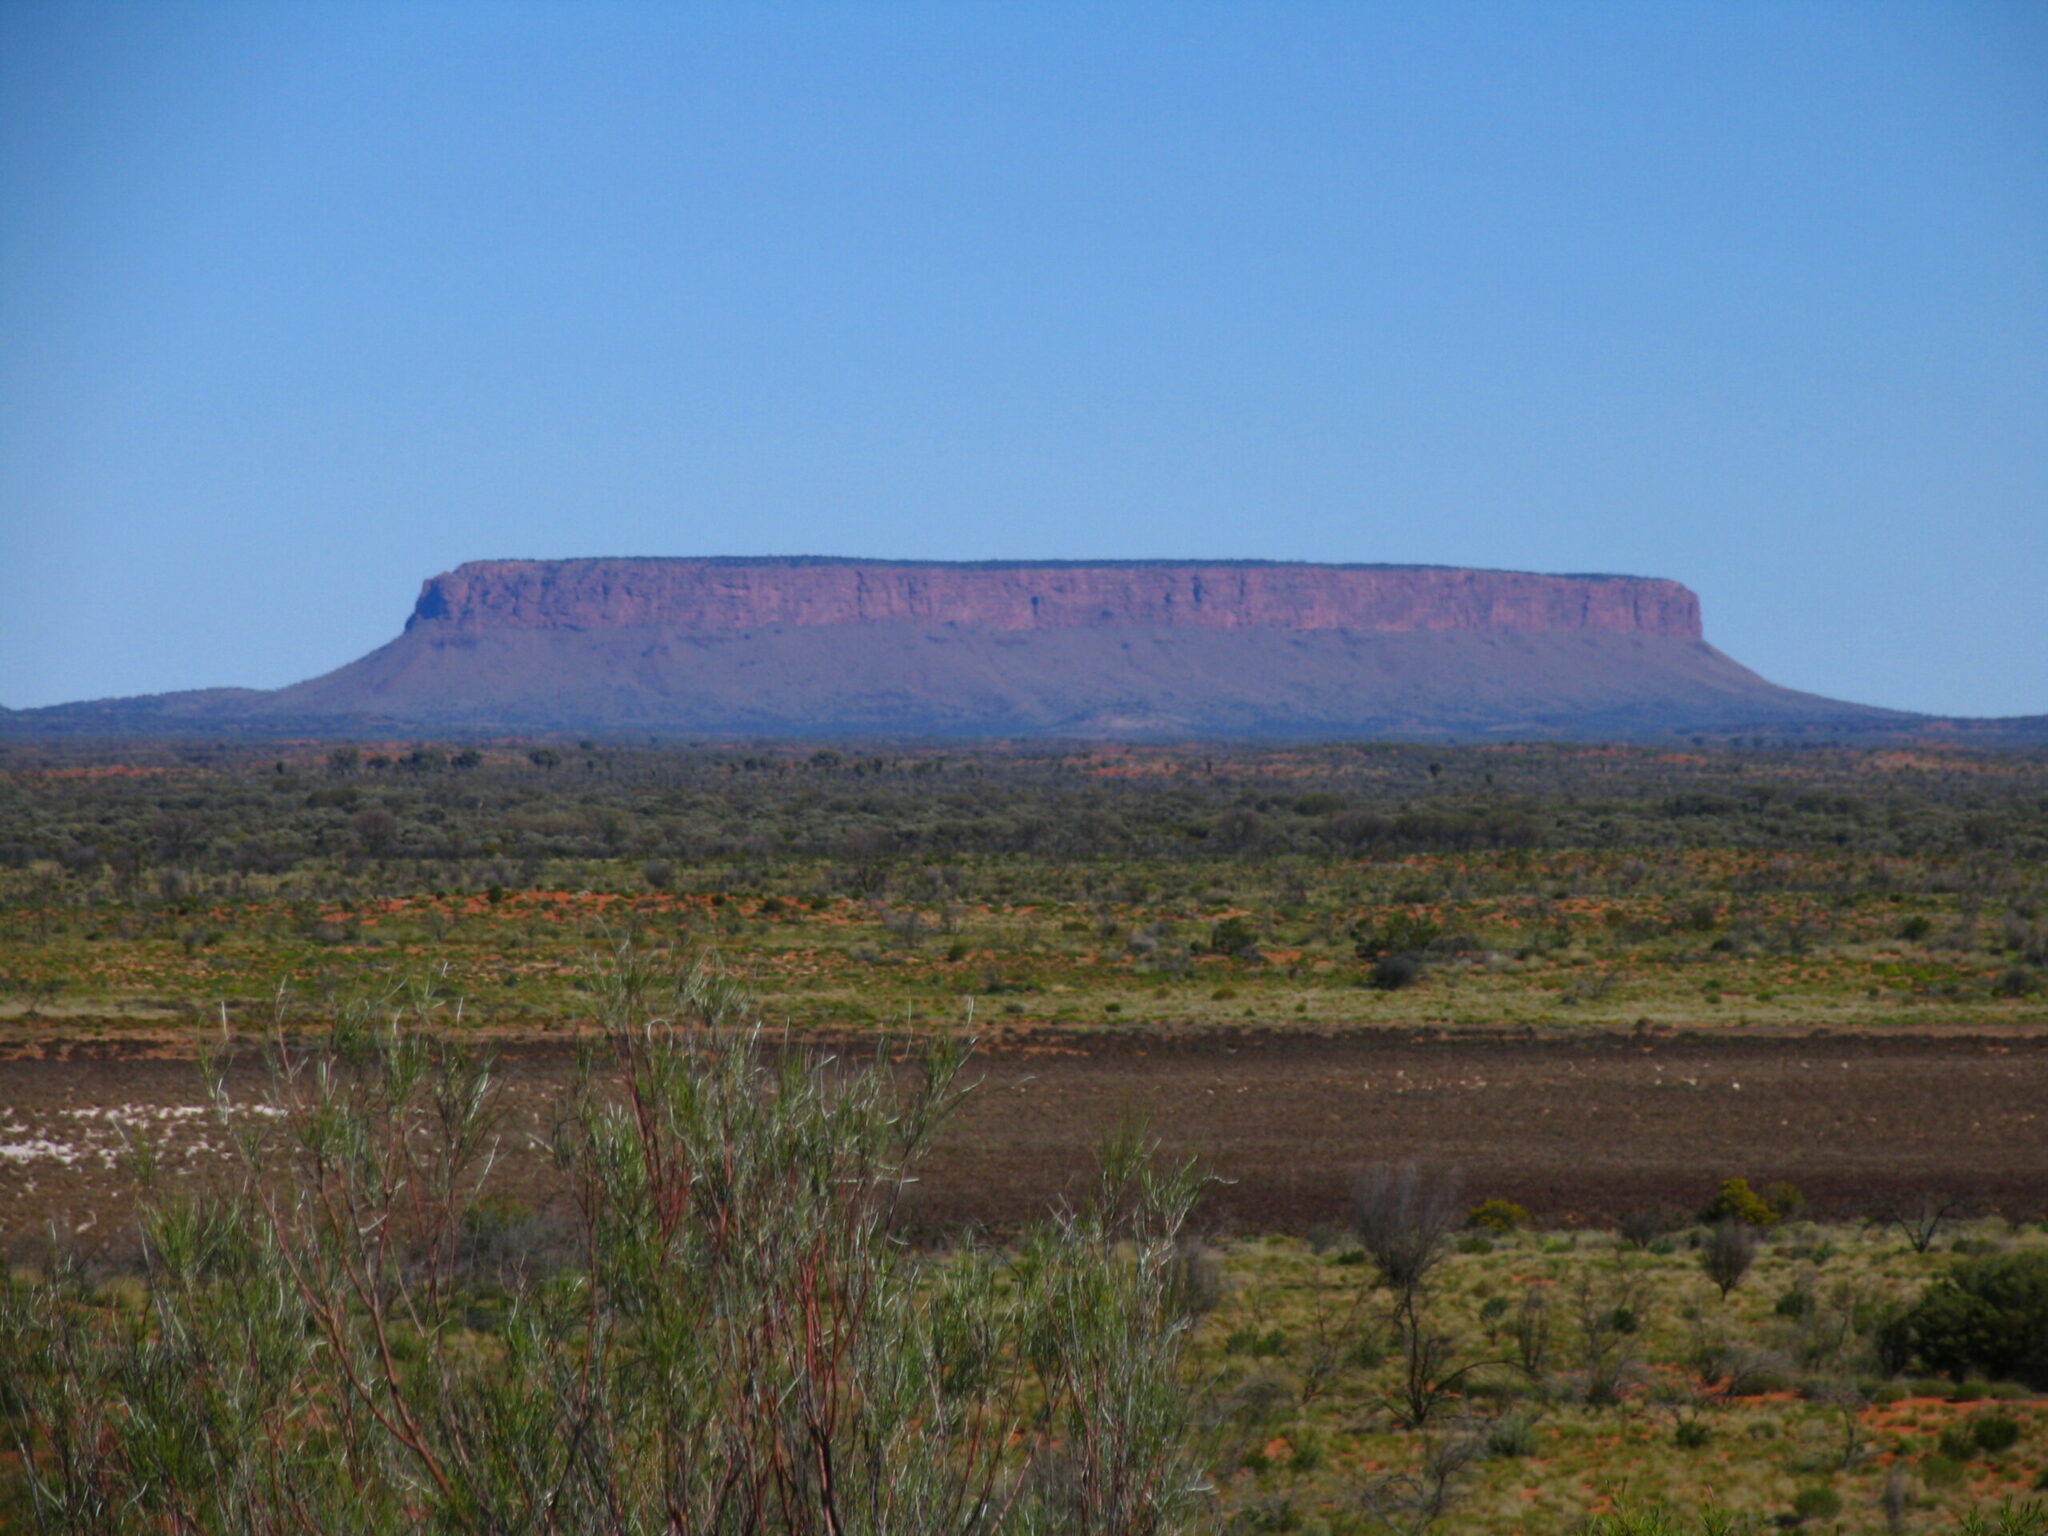 where is the outback located in australia and how was uluru or ayers rock in central australia created scaled